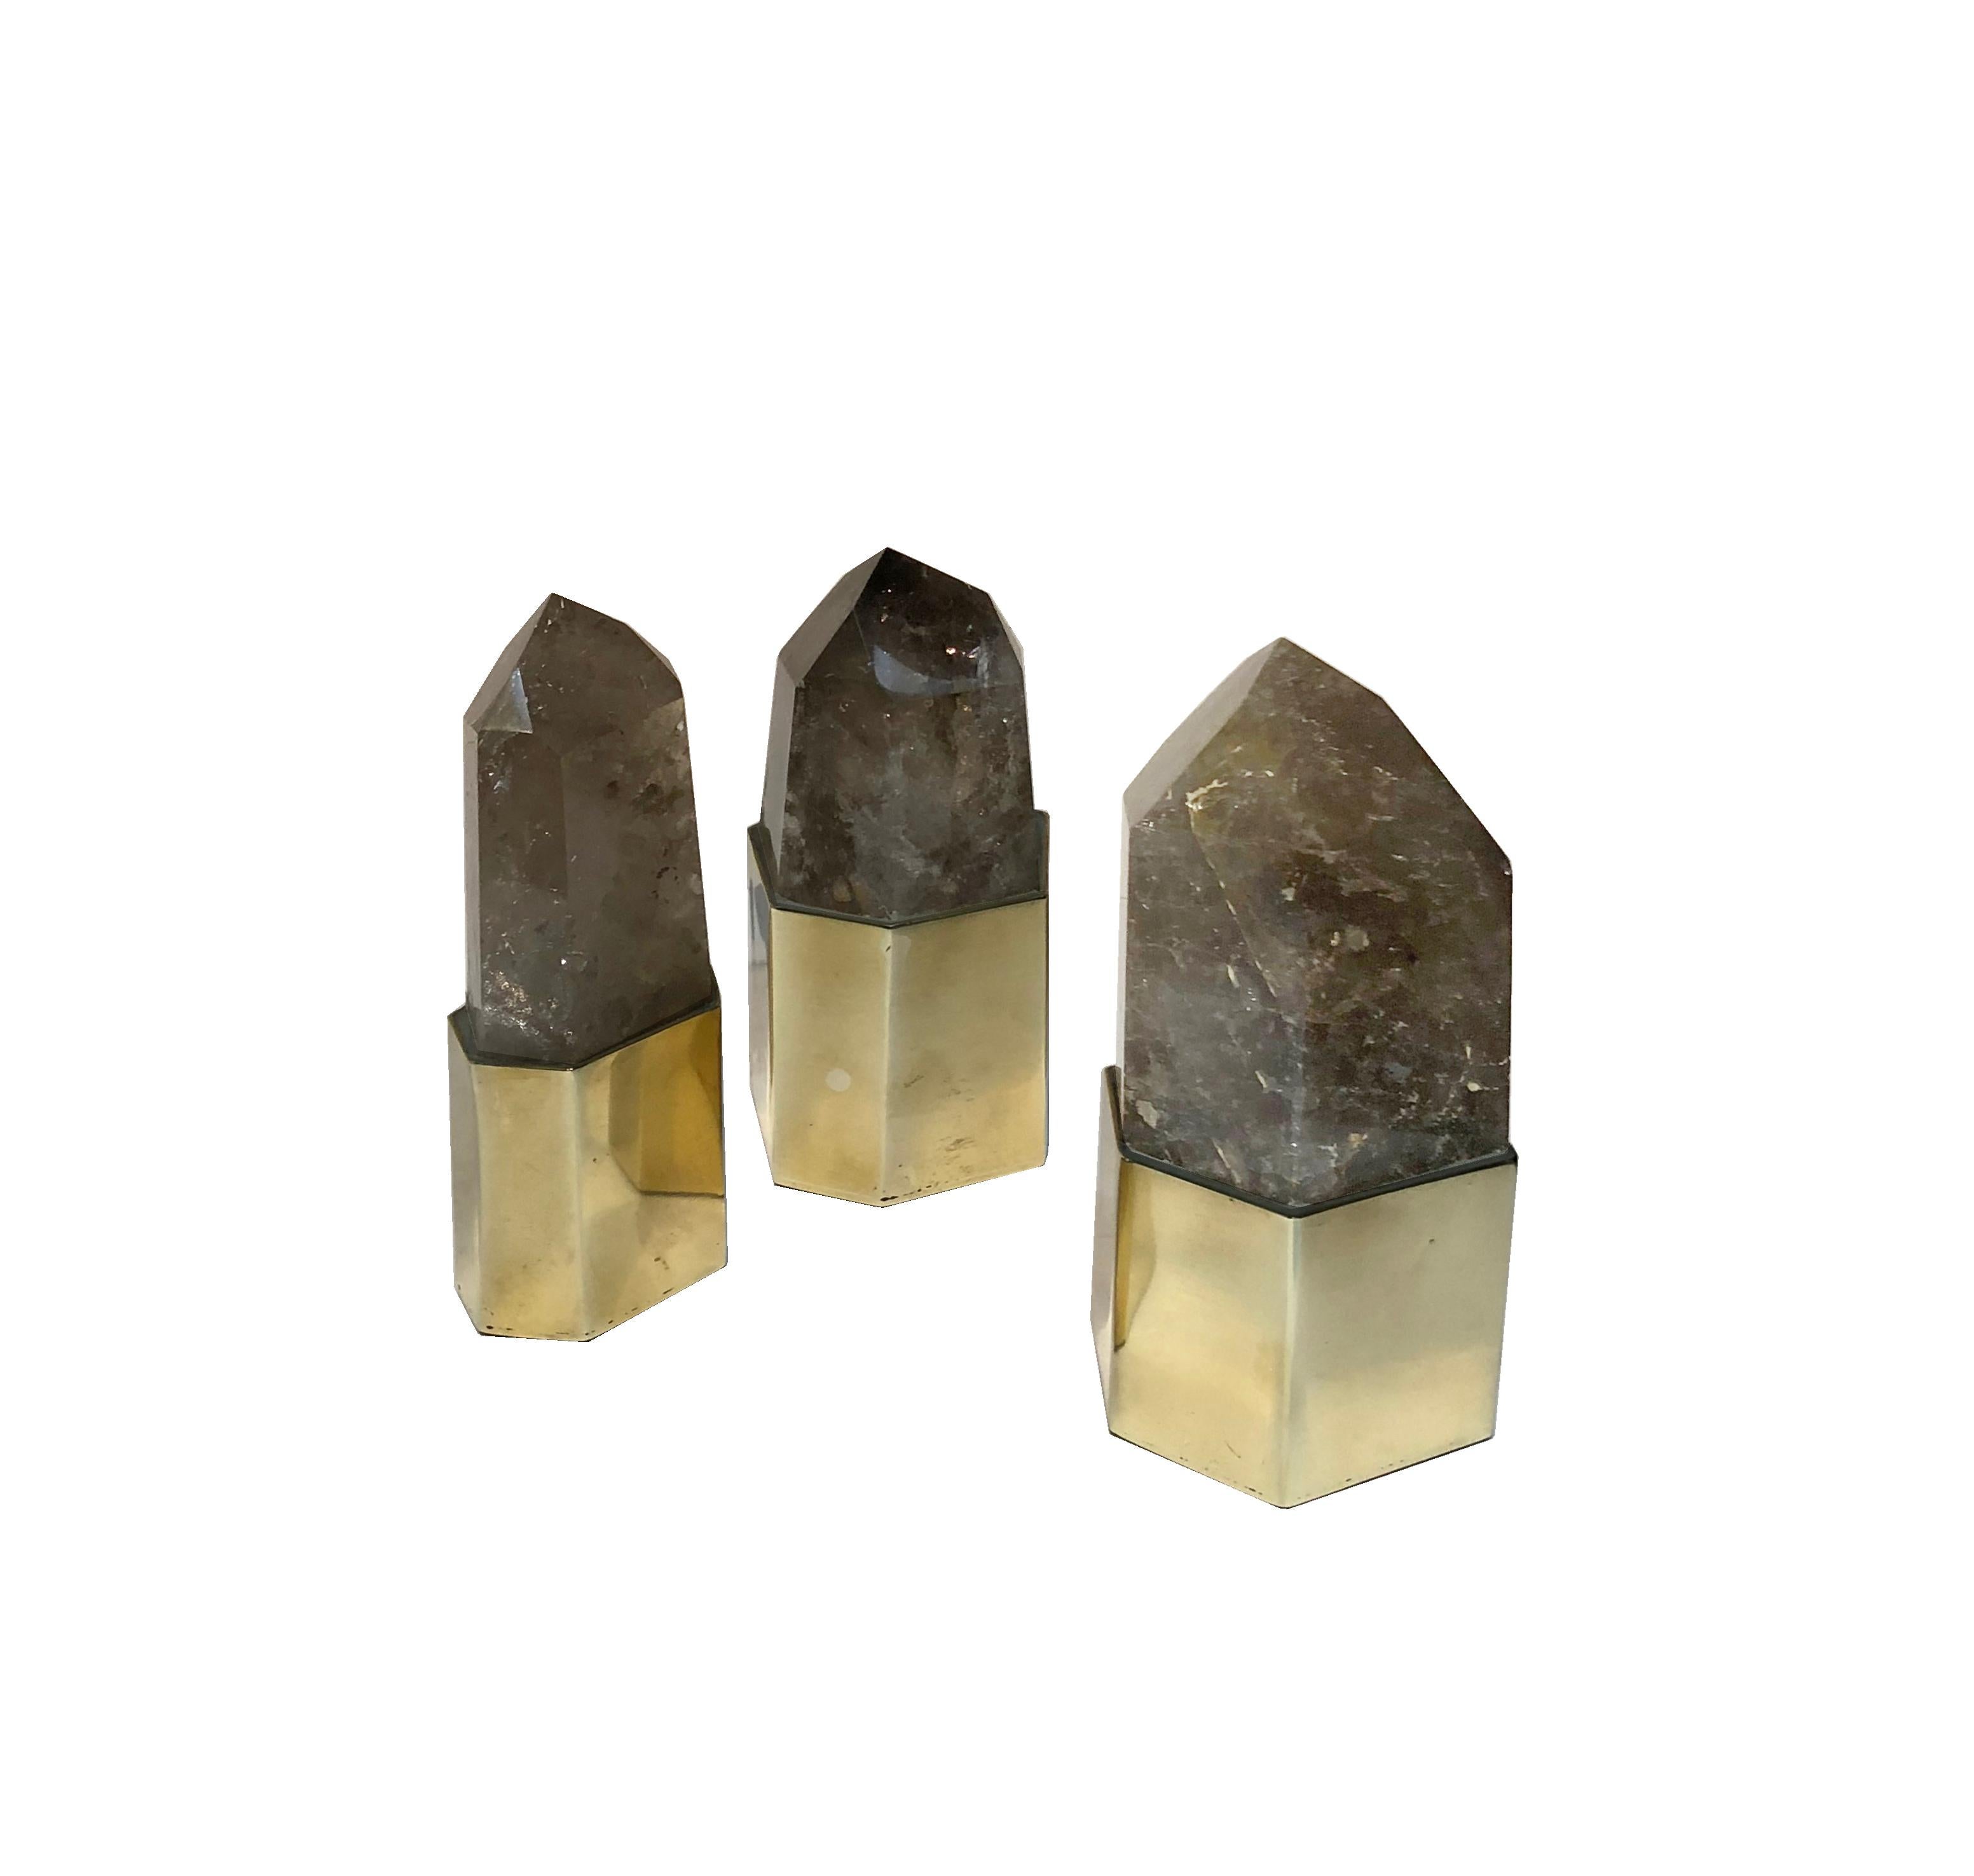 Stunning set of 3 smoked quartz setted on a geometrical multifaceted natural brass bezels. 
An eye-catching decorative object and a statement timeless piece suitable for every space: picture it above a stack of coffee table books or close to a